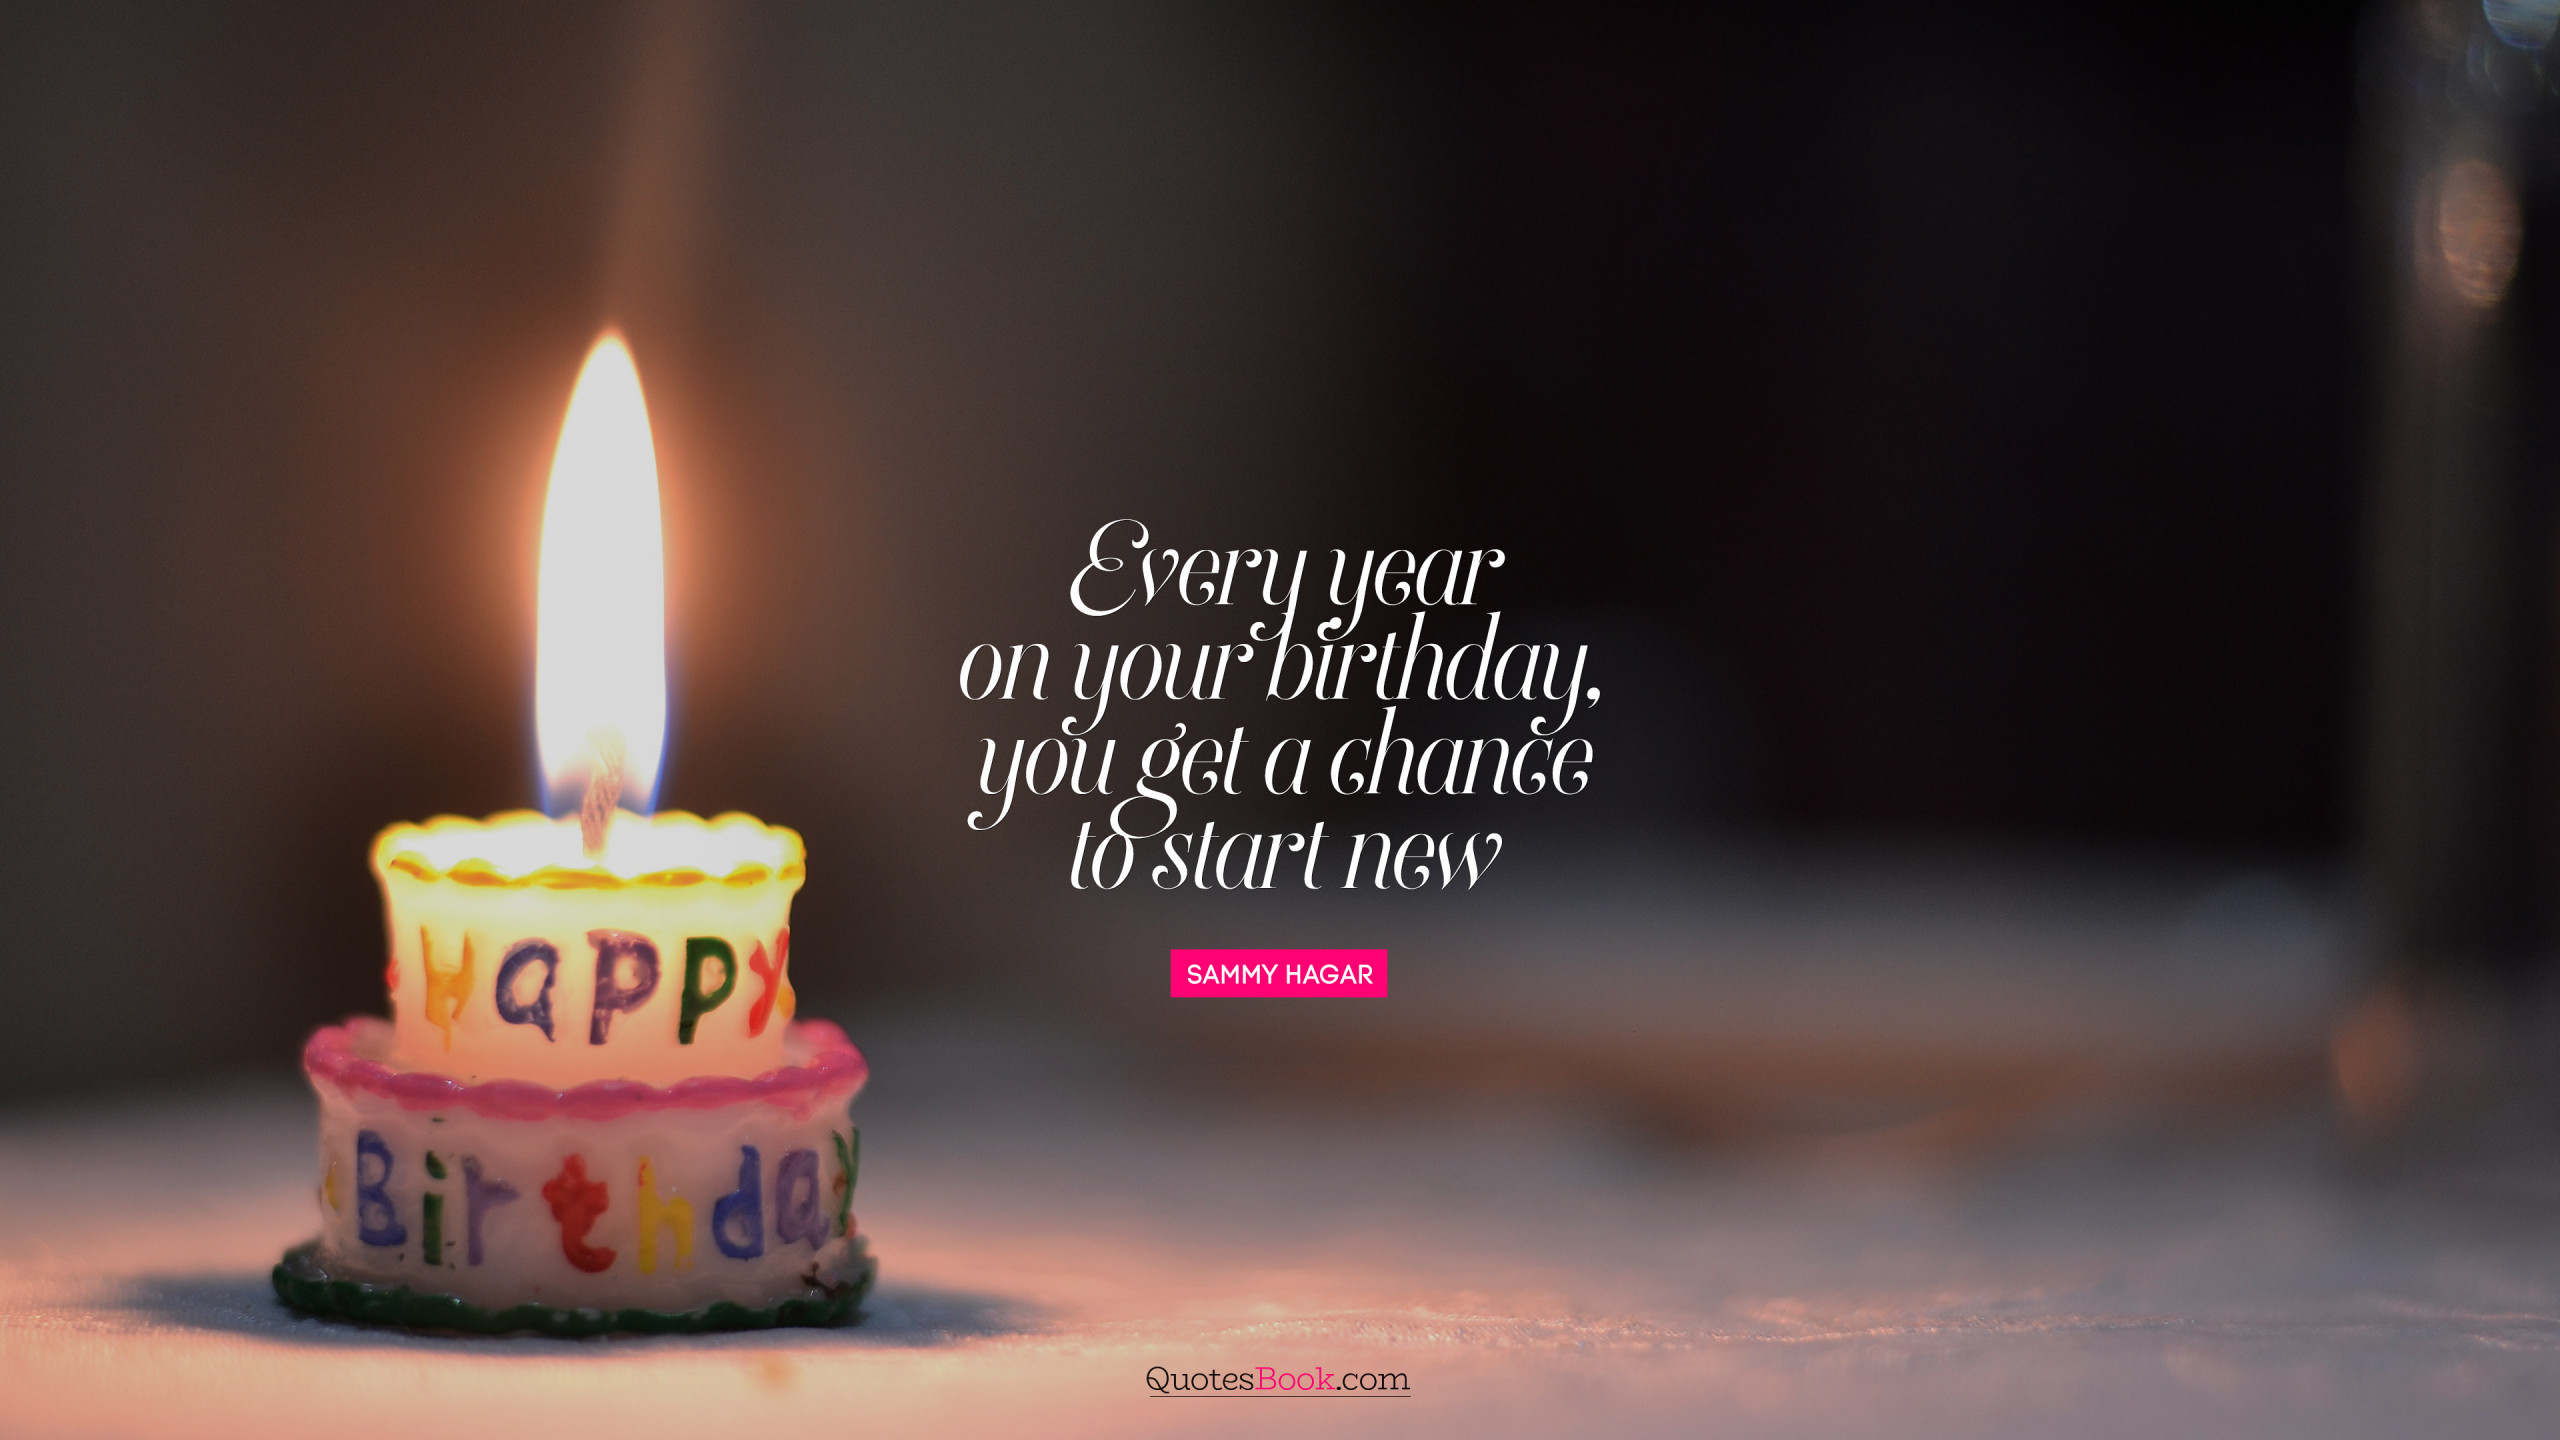 Every year on your birthday, you get a chance to start new. - Quote by